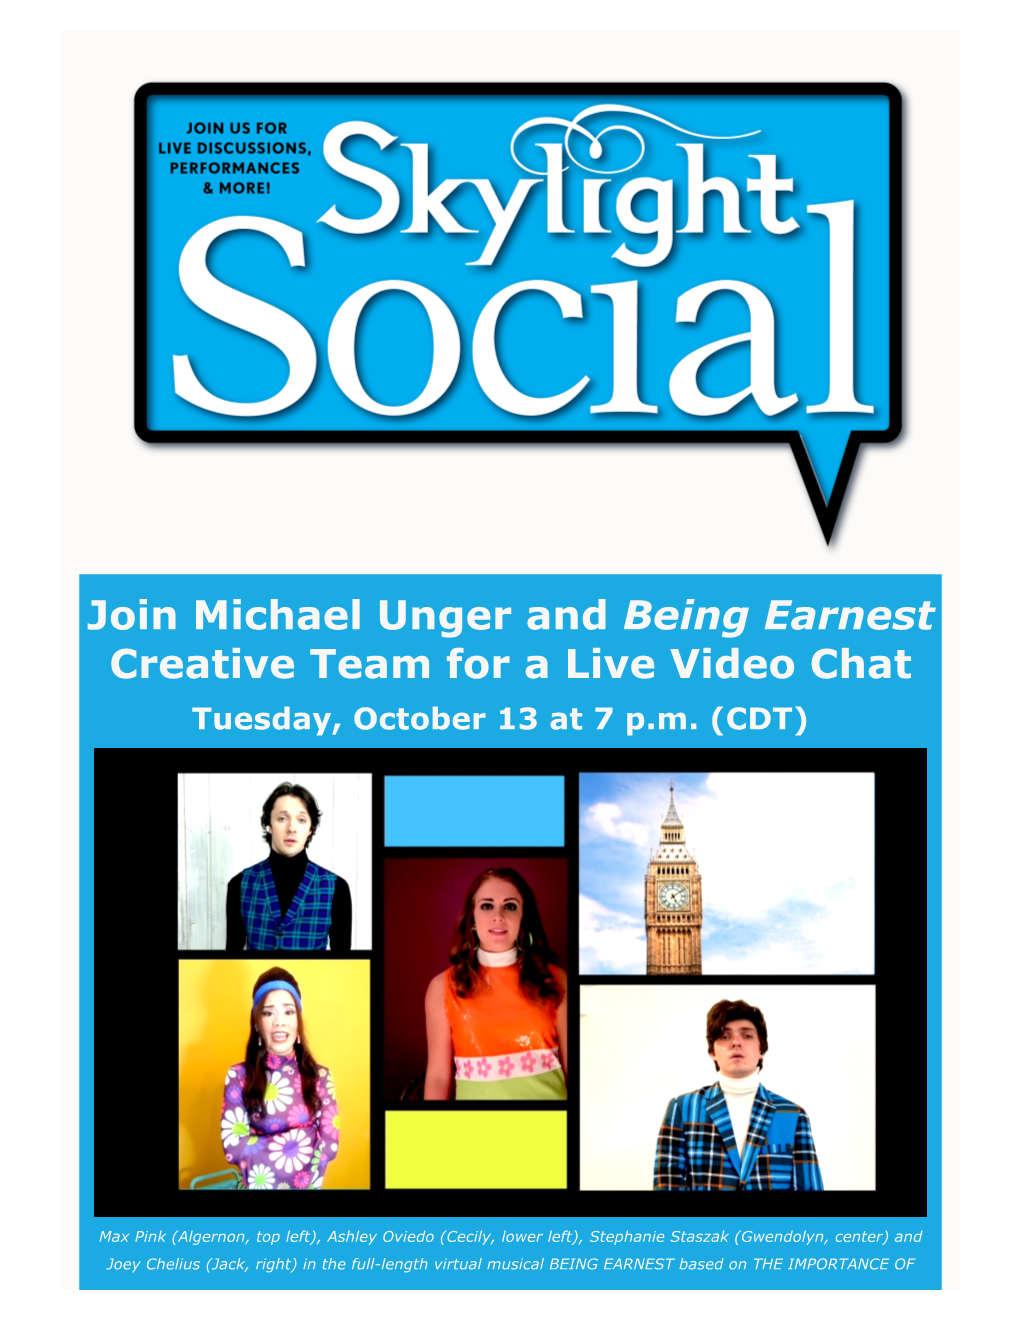 Join Michael Unger and Being Earnest Creative Team for a Live Video Chat Tuesday, October 13 at 7 P.M